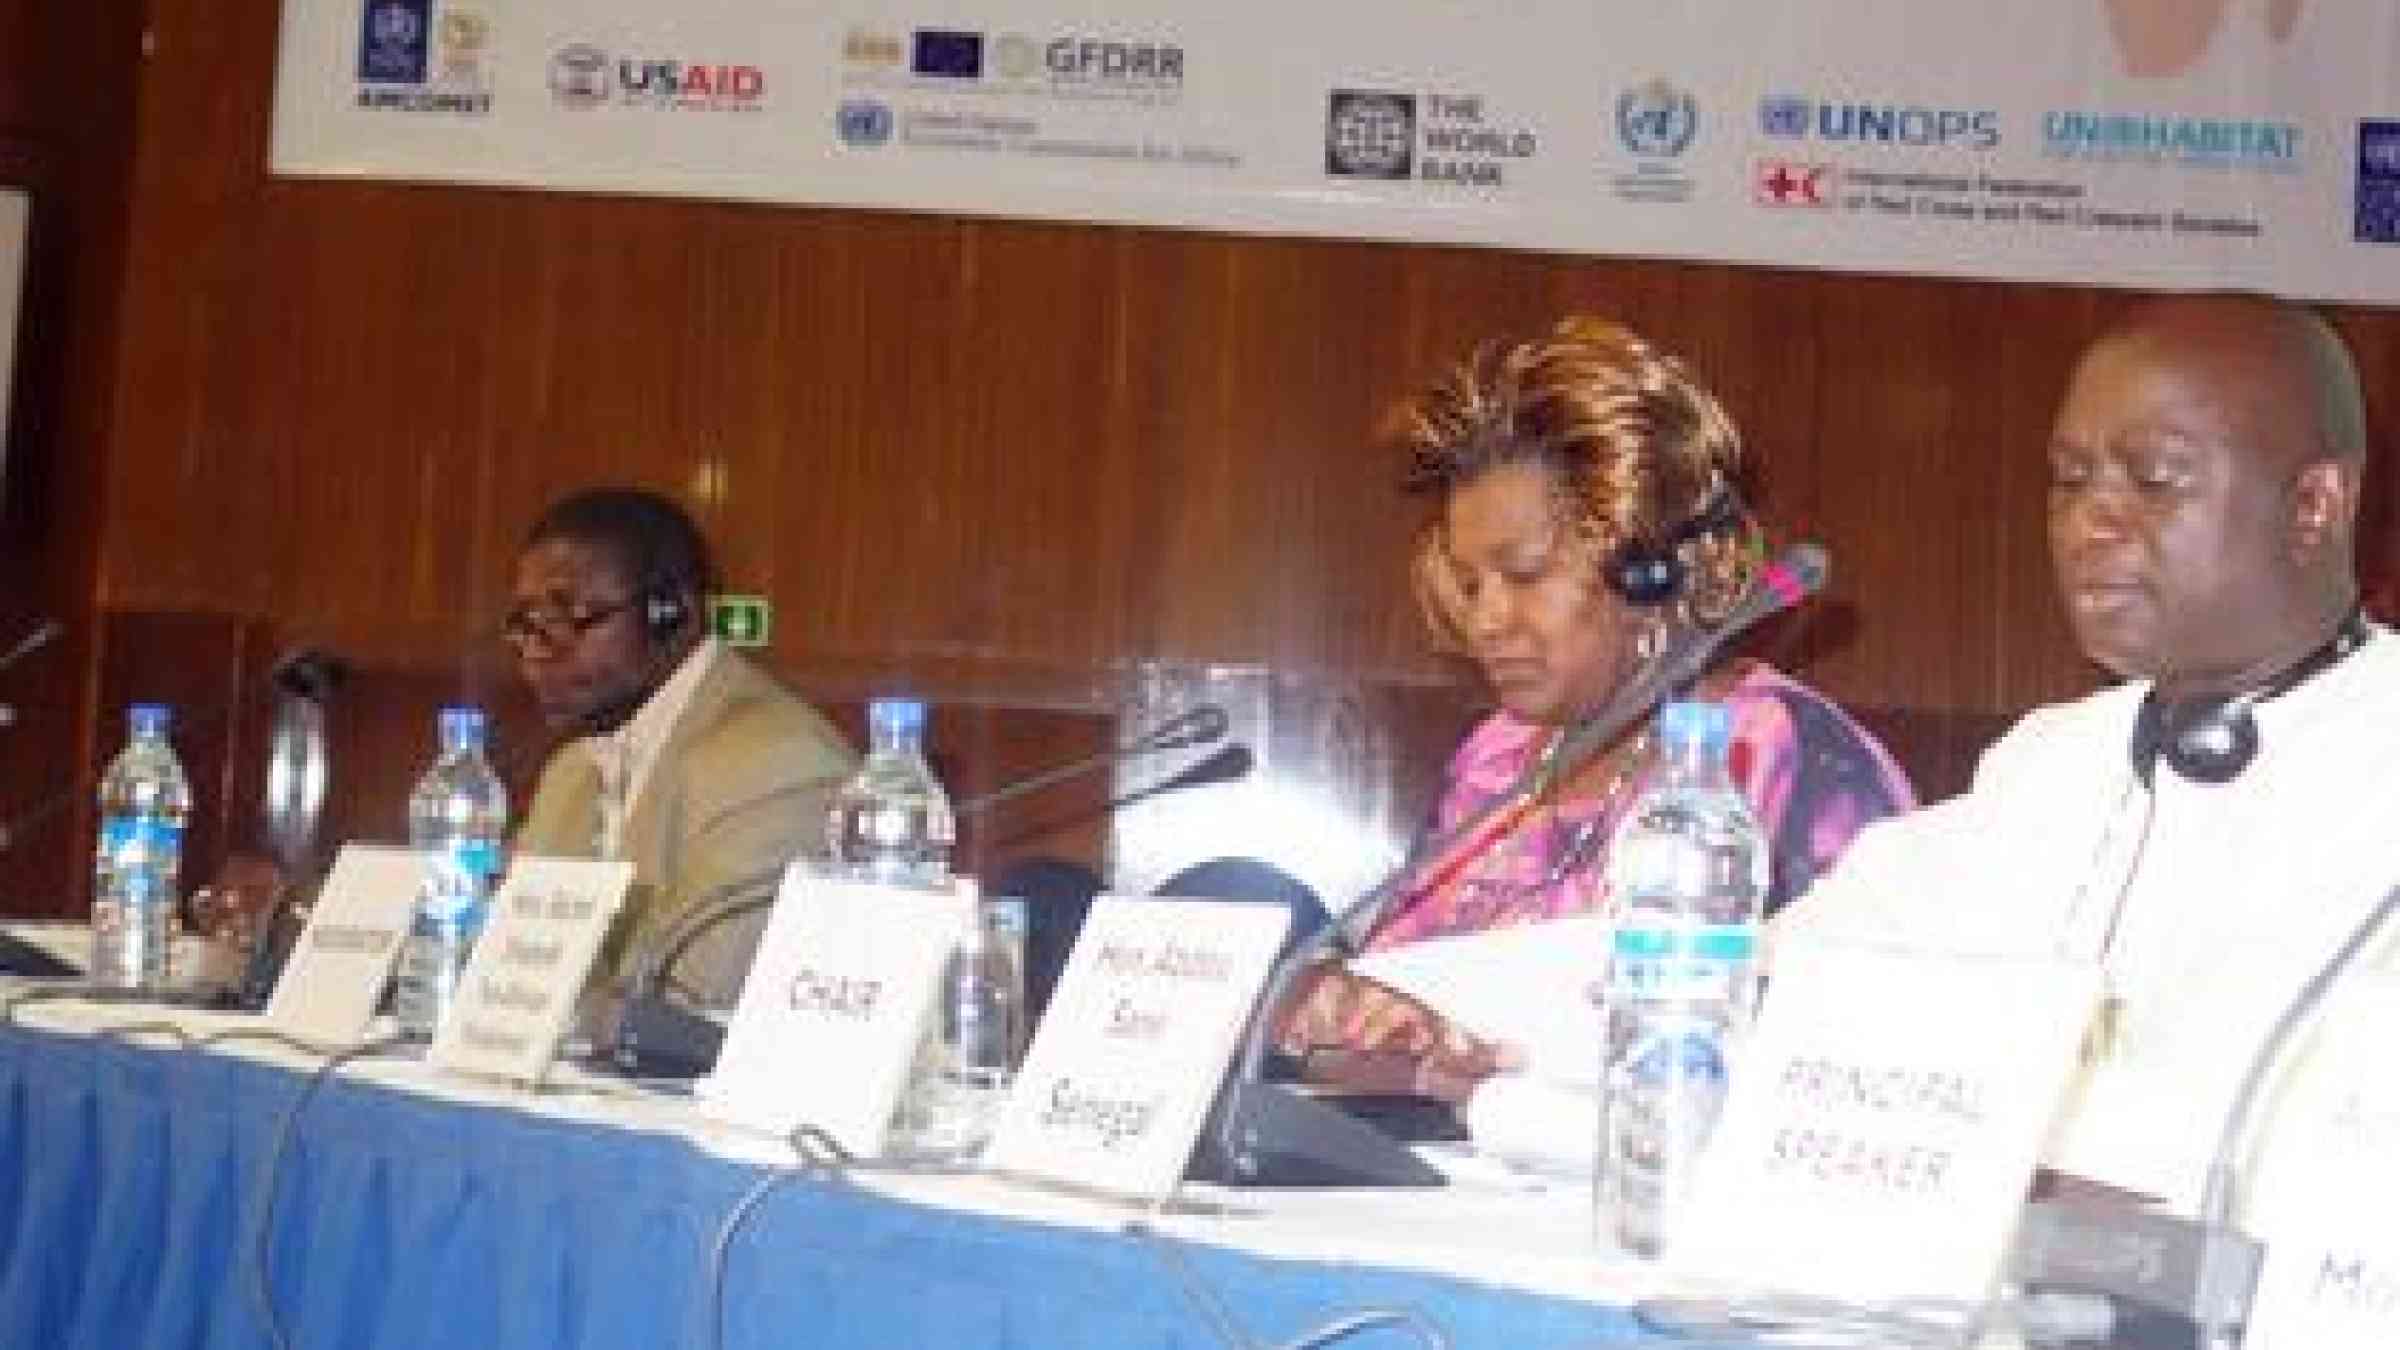 (from left to right) Secretary General Sierra Leone Red Cross, Emmanuel Hindovei Tommy, Hon. Abdou Sane, panel chairman, Hon. Rachel Shebesh, Moderator, during plenary session to discuss Managing Risk: Policy and Institutions (Photo: UNISDR)